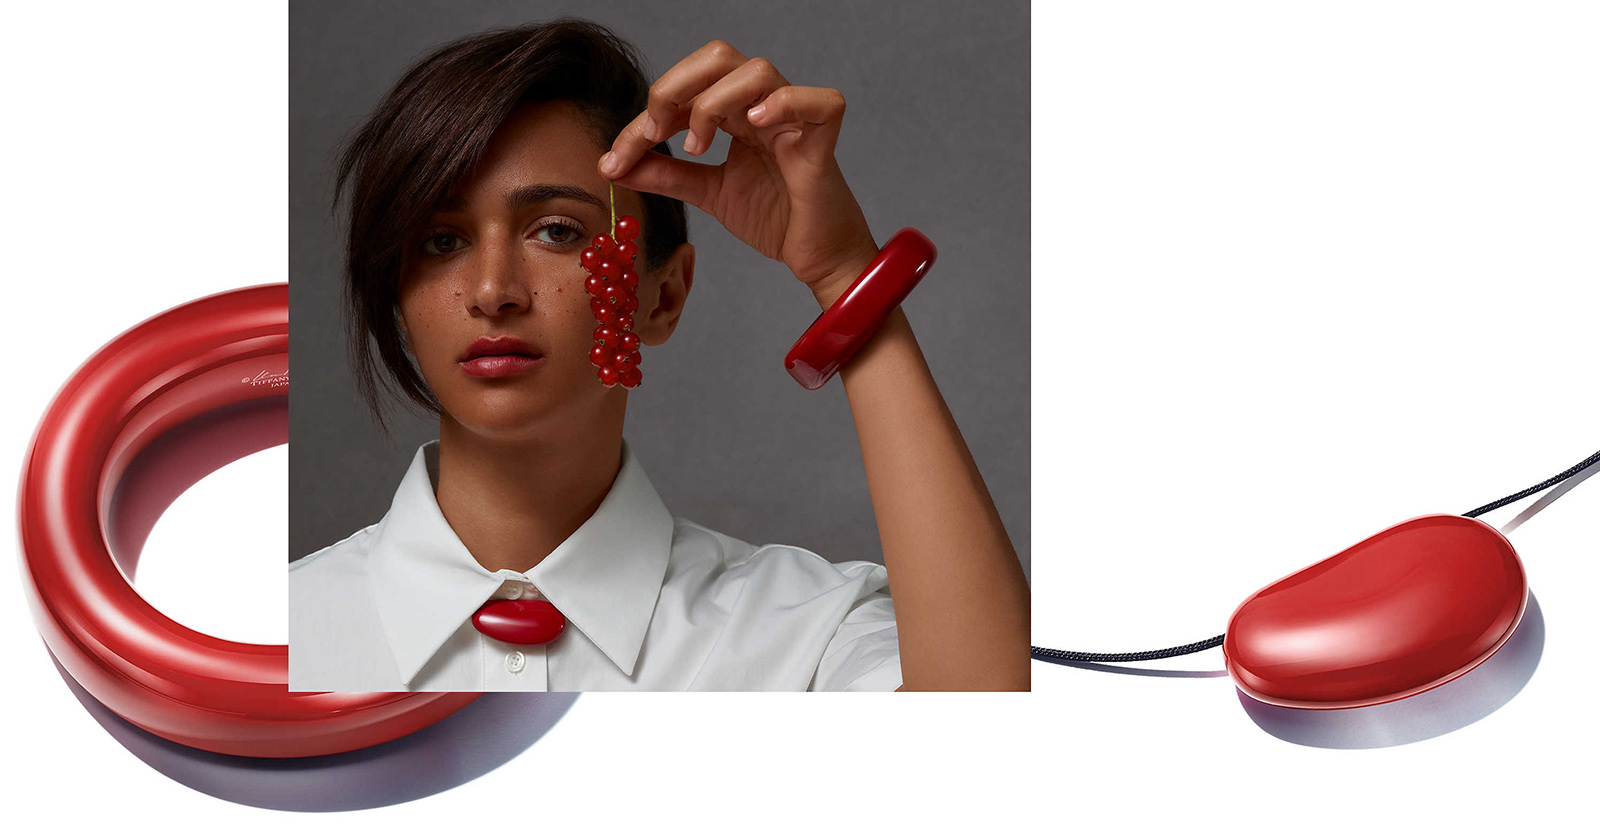 Elsa Peretti Lacquer jewellery creations, including a red lacquered hardwood bangle and Bean pendant, styled by Kate Young for Tiffany & Co.